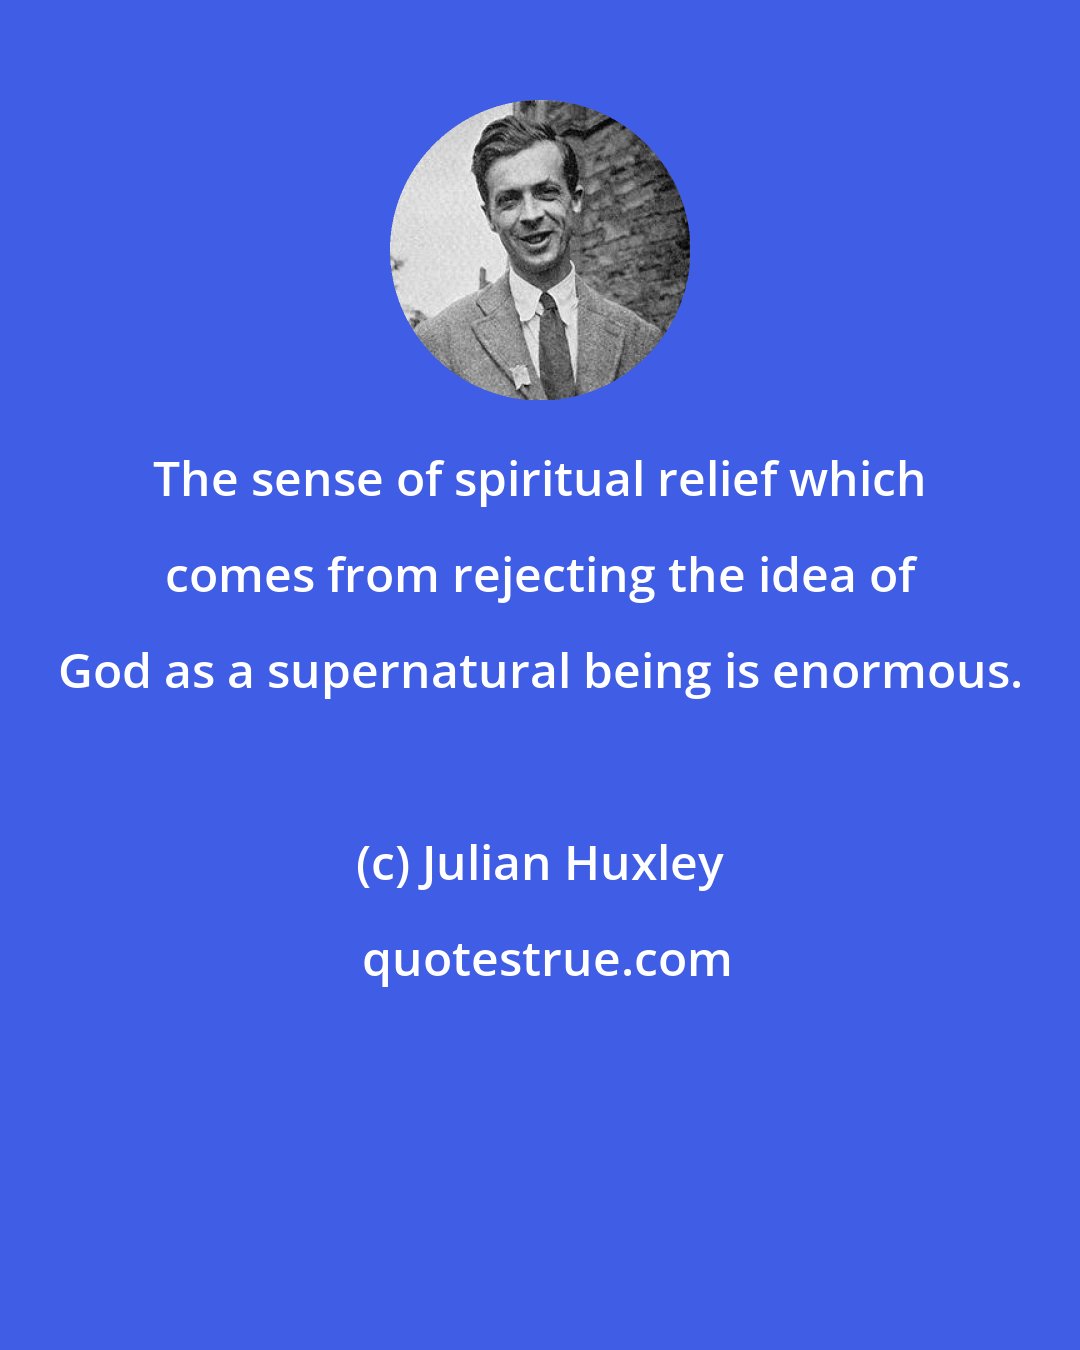 Julian Huxley: The sense of spiritual relief which comes from rejecting the idea of God as a supernatural being is enormous.